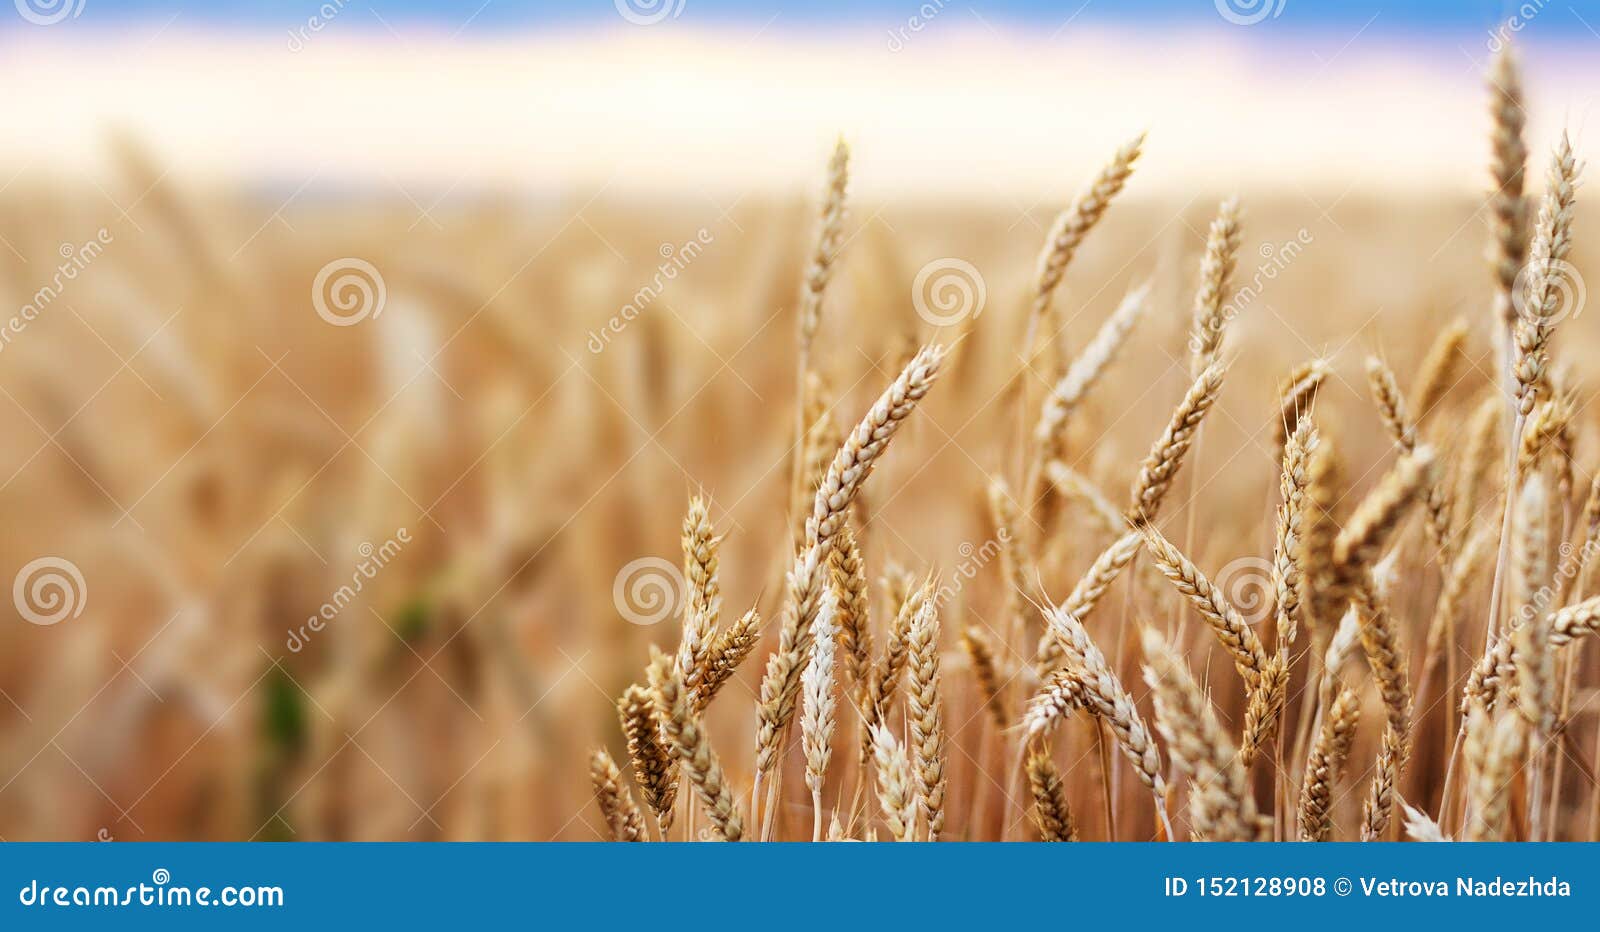 Wheat Field Ears Golden Wheat Close. Wallpaper Stock Photo - Image of  bright, crop: 152128908